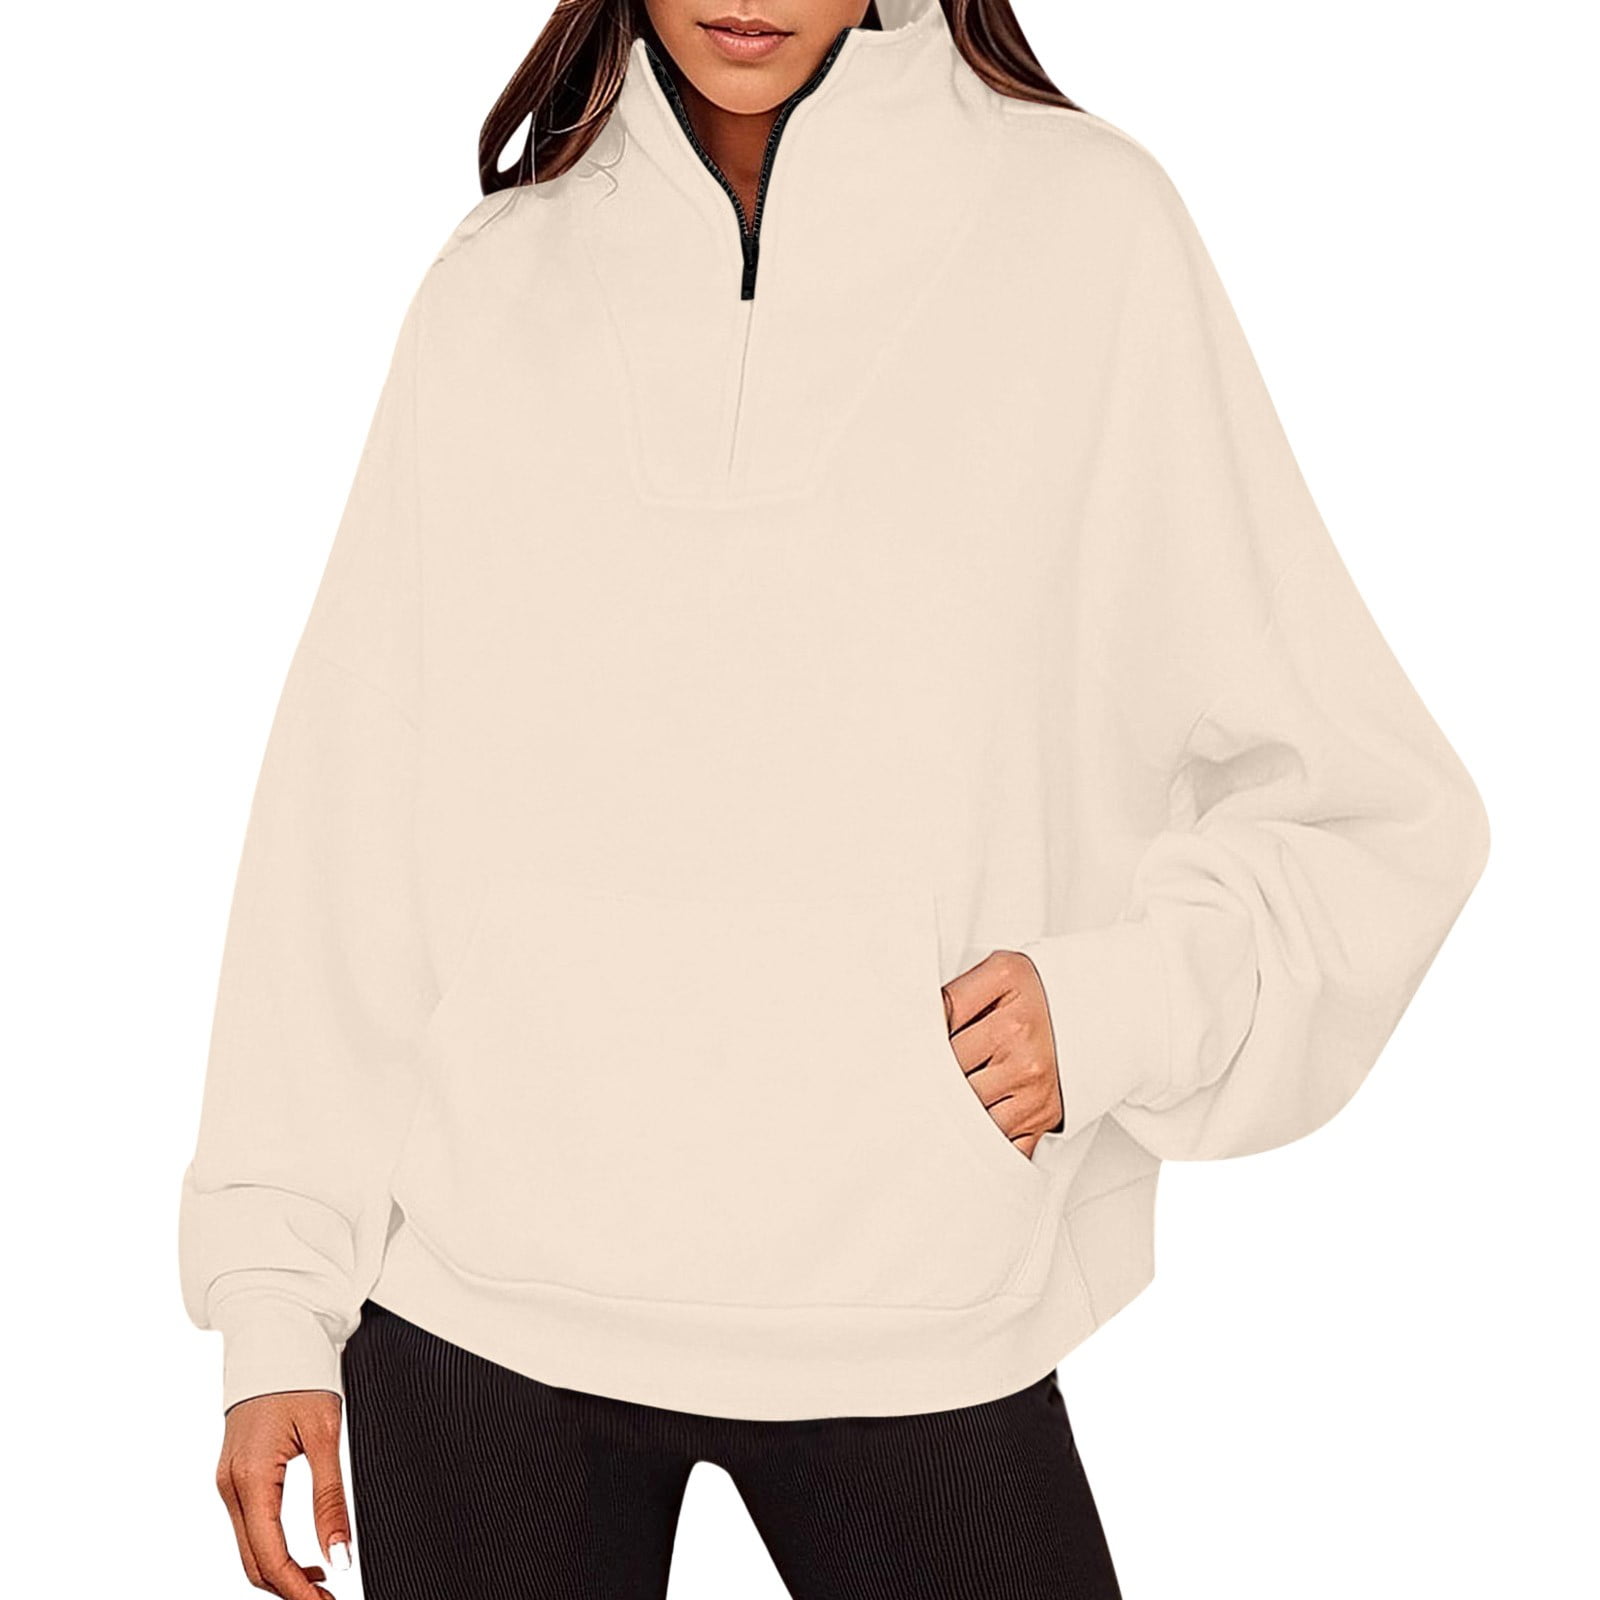 LIBRCLO Women's Sweatshirts No Hood Clearance with Pockets Long Casual ...